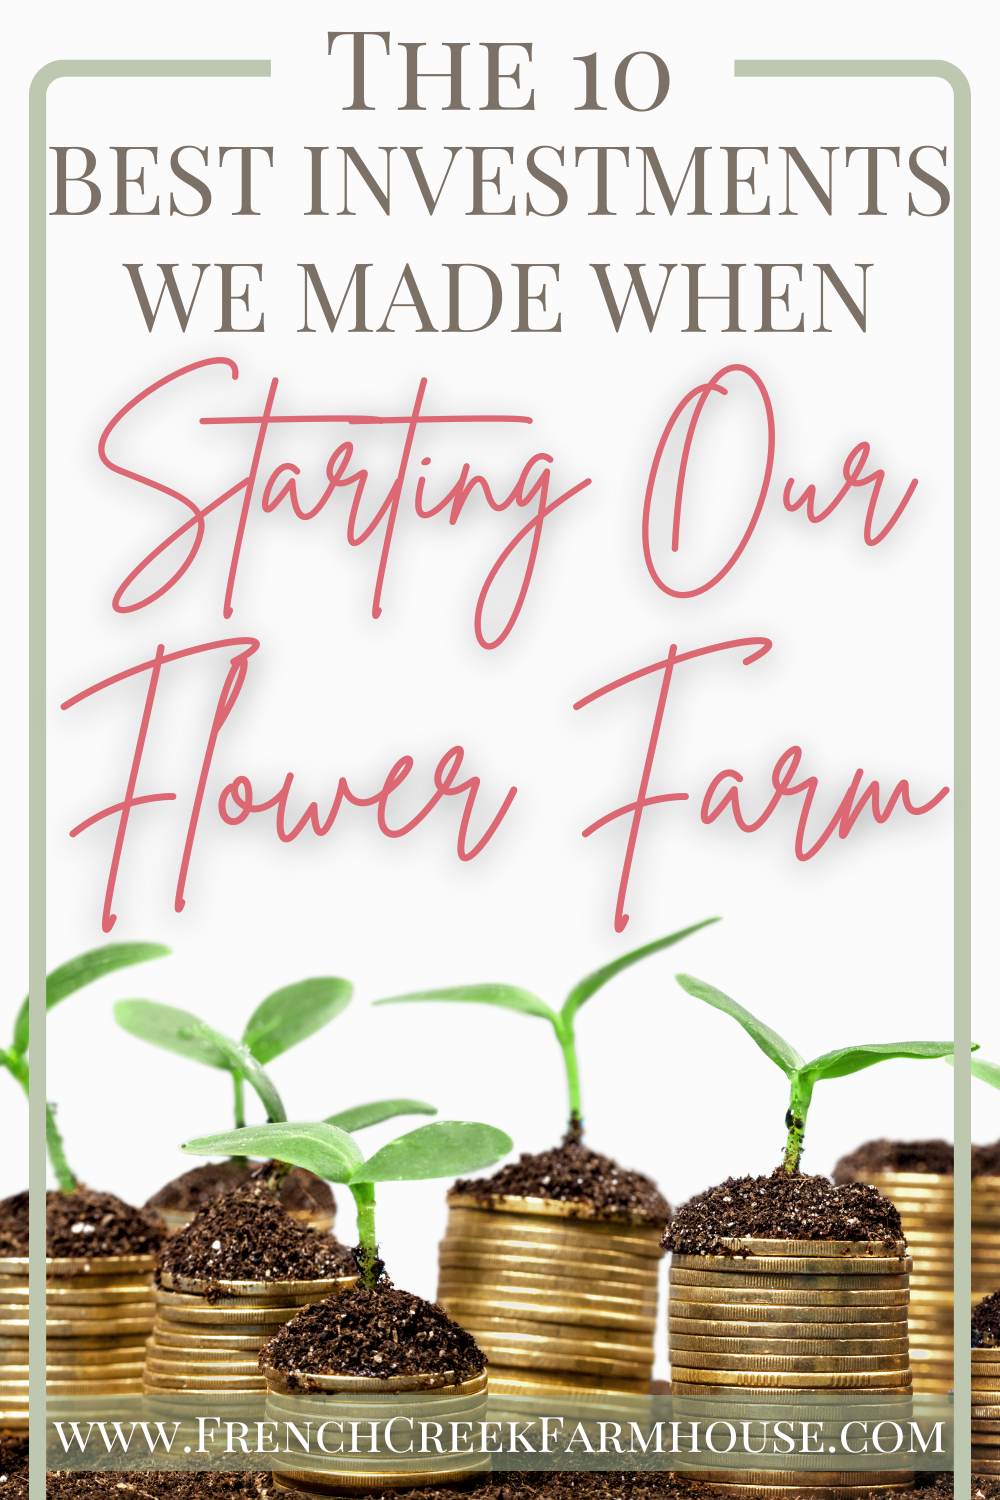 The 10 best investments we made when starting our flower farm!